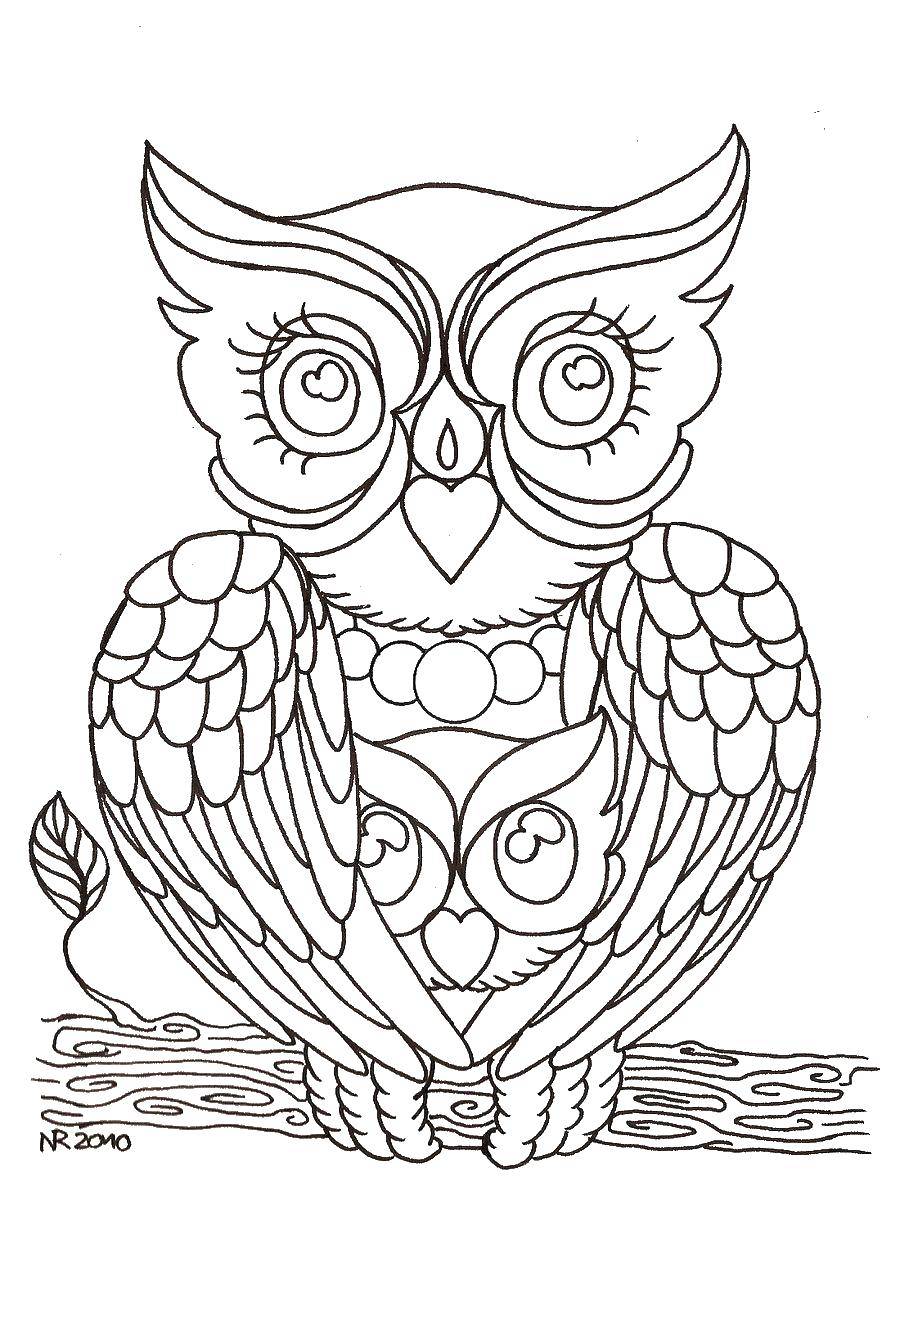 Coloring Two owls. Category coloring. Tags:  birds, owls.